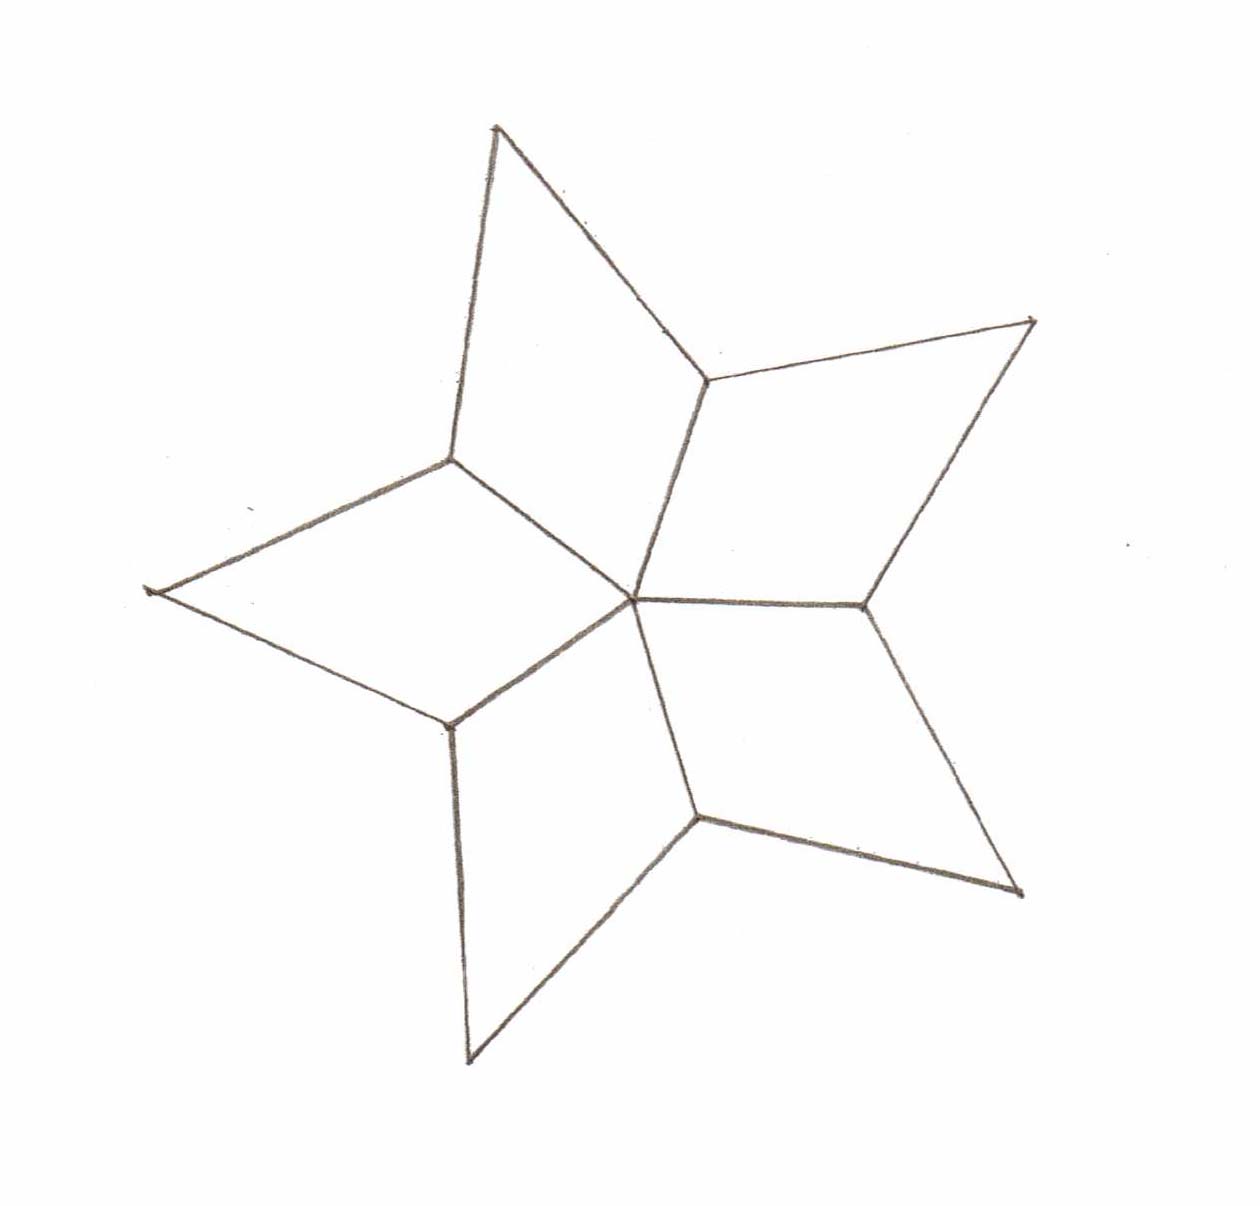 6-best-images-of-5-point-printable-star-pattern-star-pattern-to-cut-out-template-5-point-star